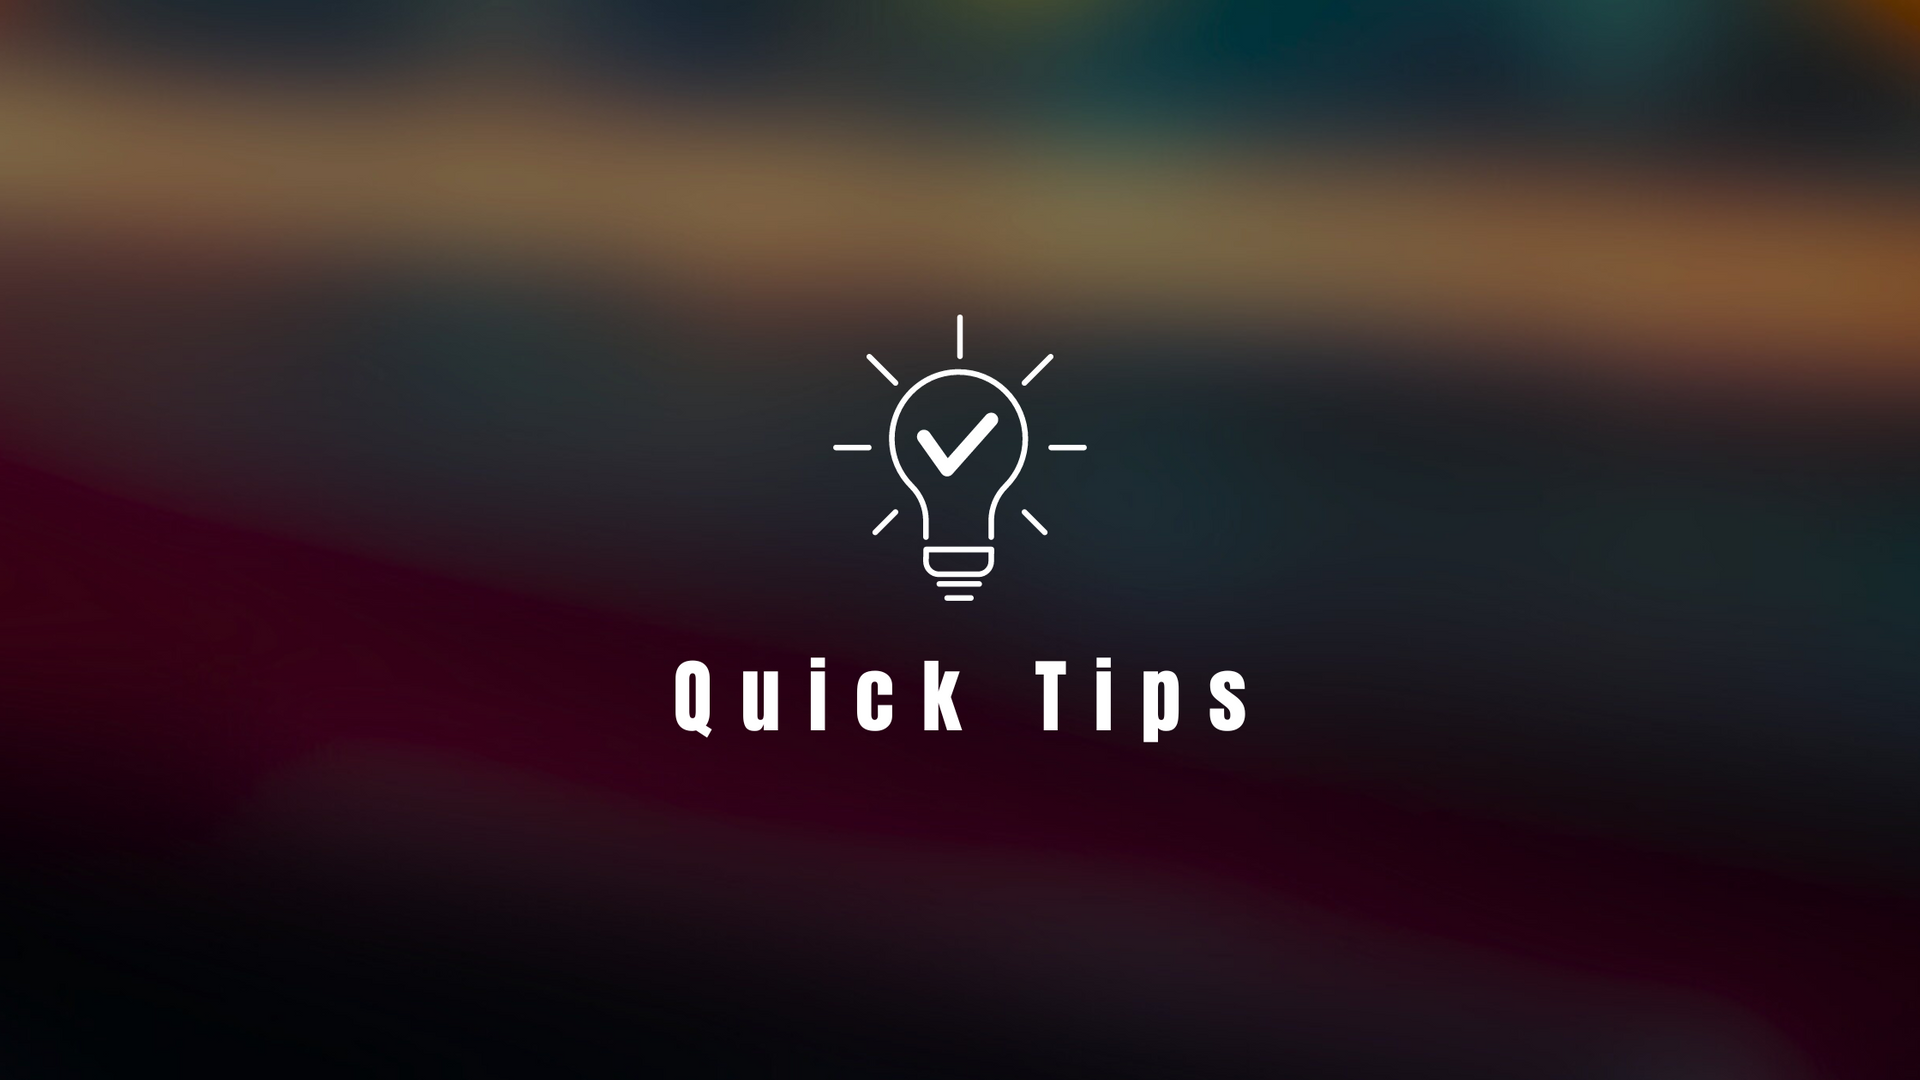 Step 2: Fusing Answers with Actionable Tips